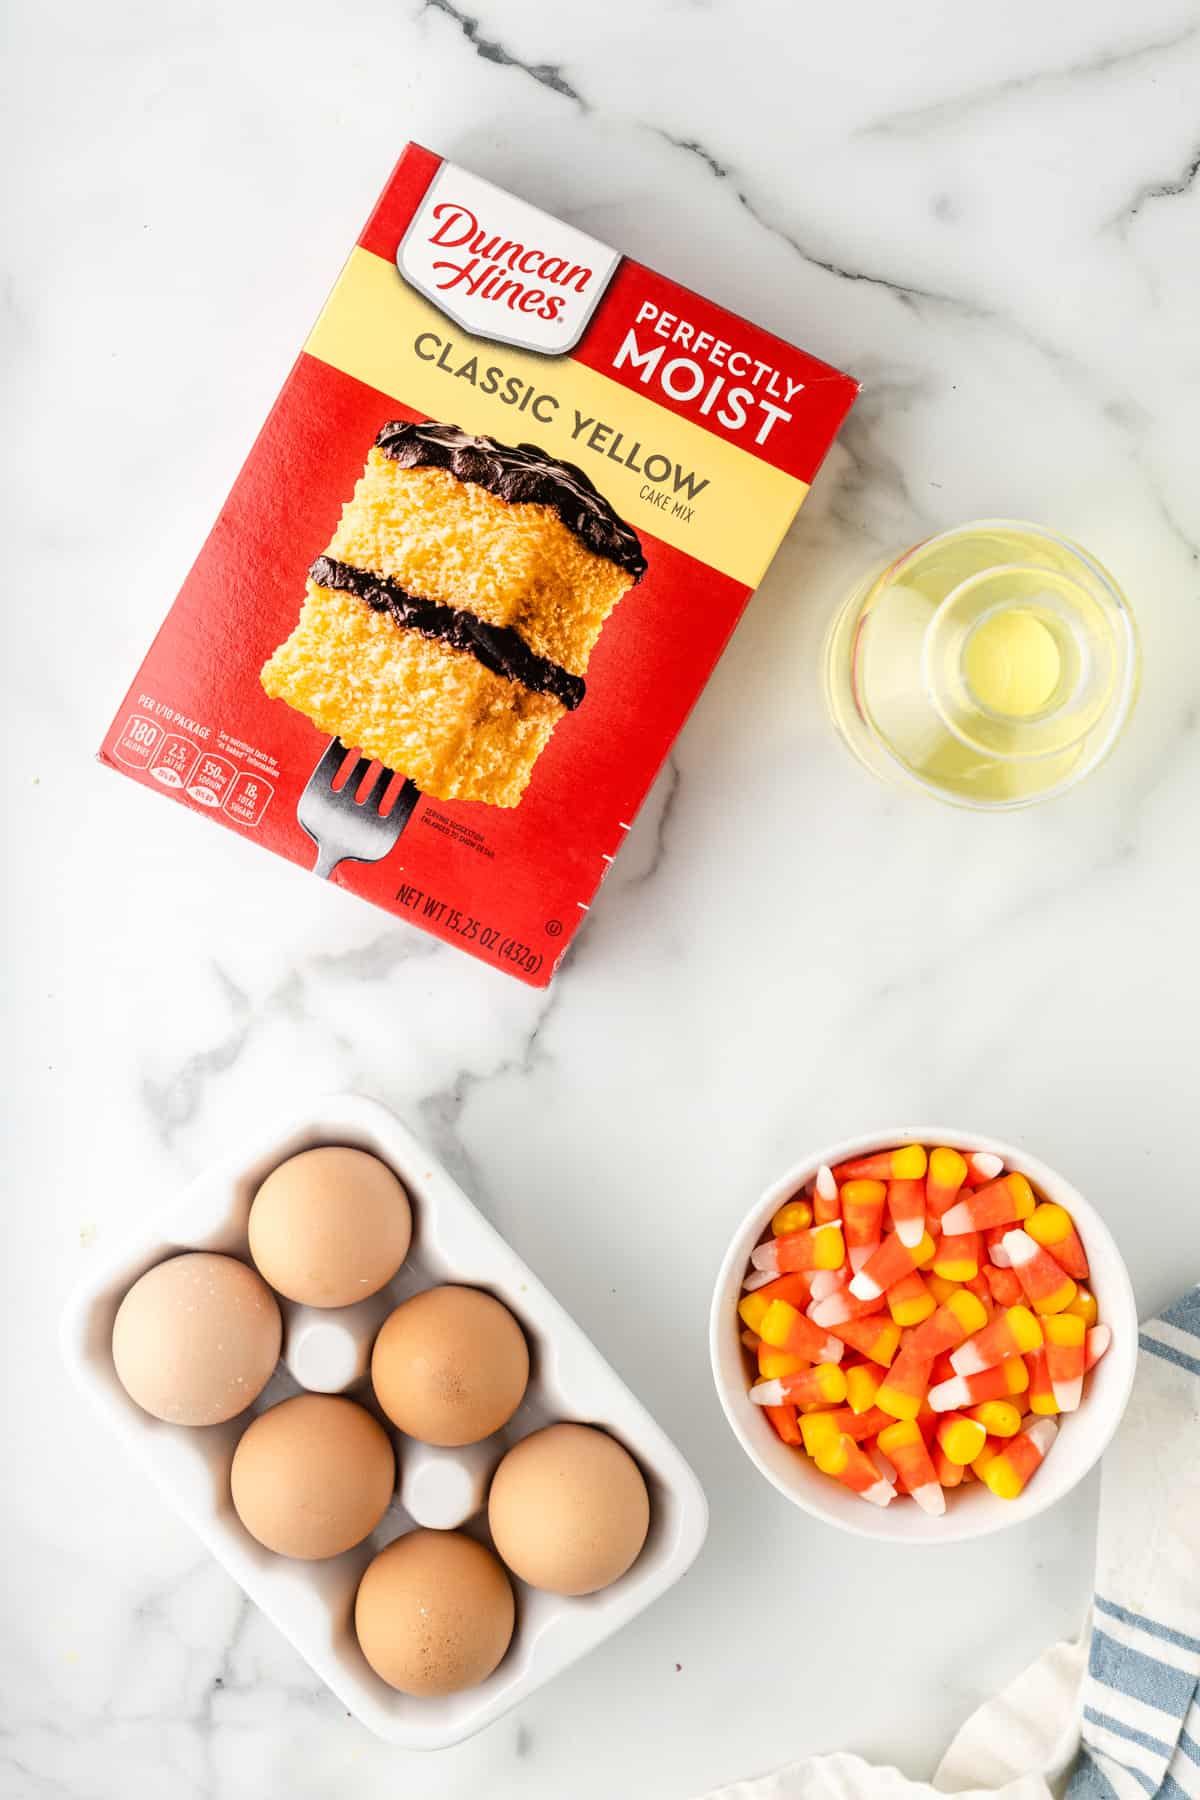 Box of Duncan Hines Perfectly Moist Classic Yellow Cake Mix, bottle of oil, 6 eggs in white carton, bowl of candy corn